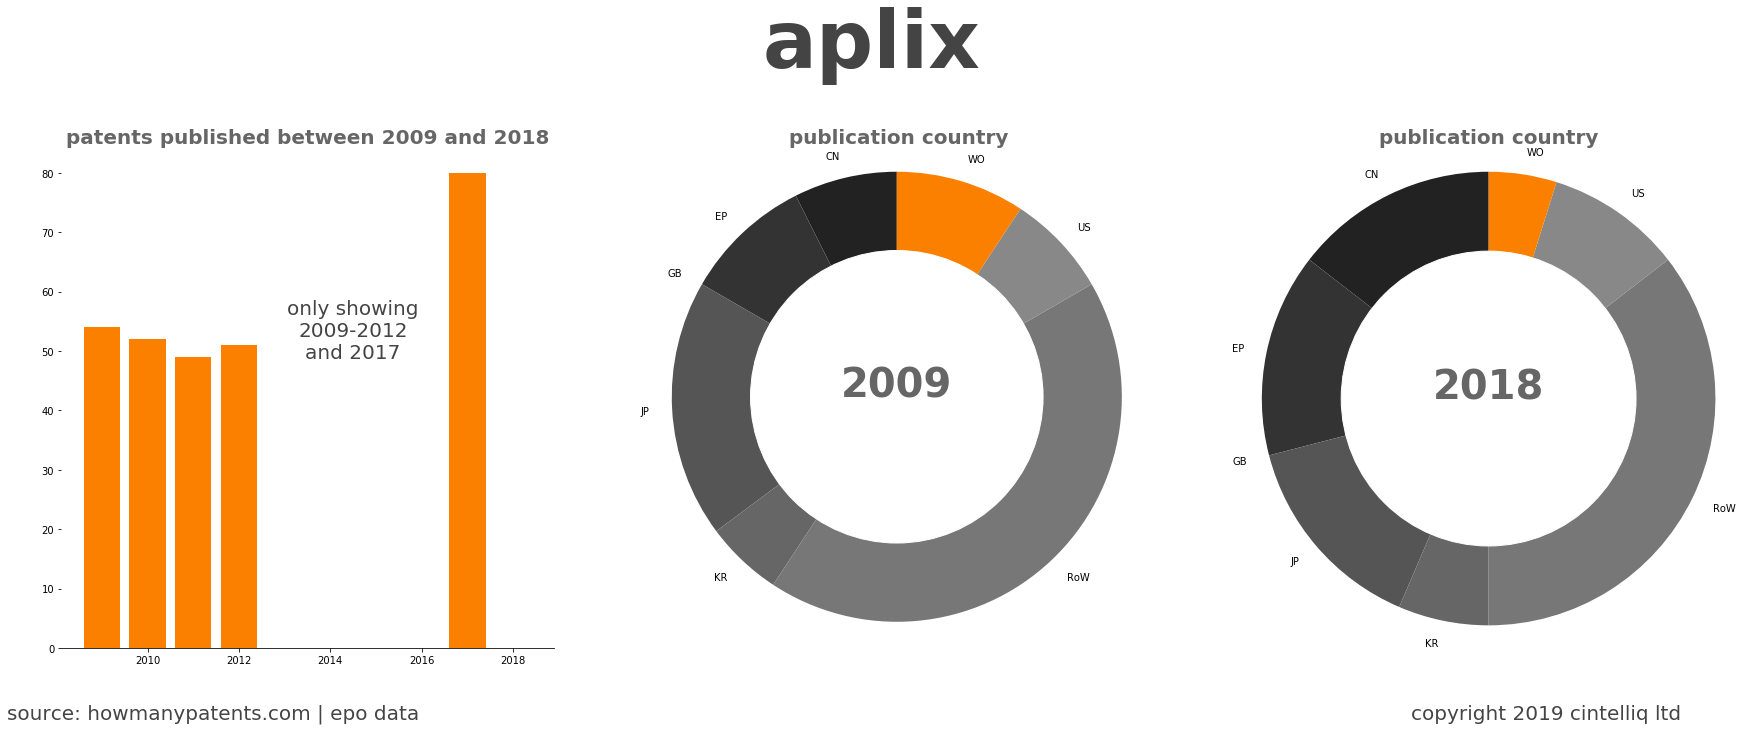 summary of patents for Aplix